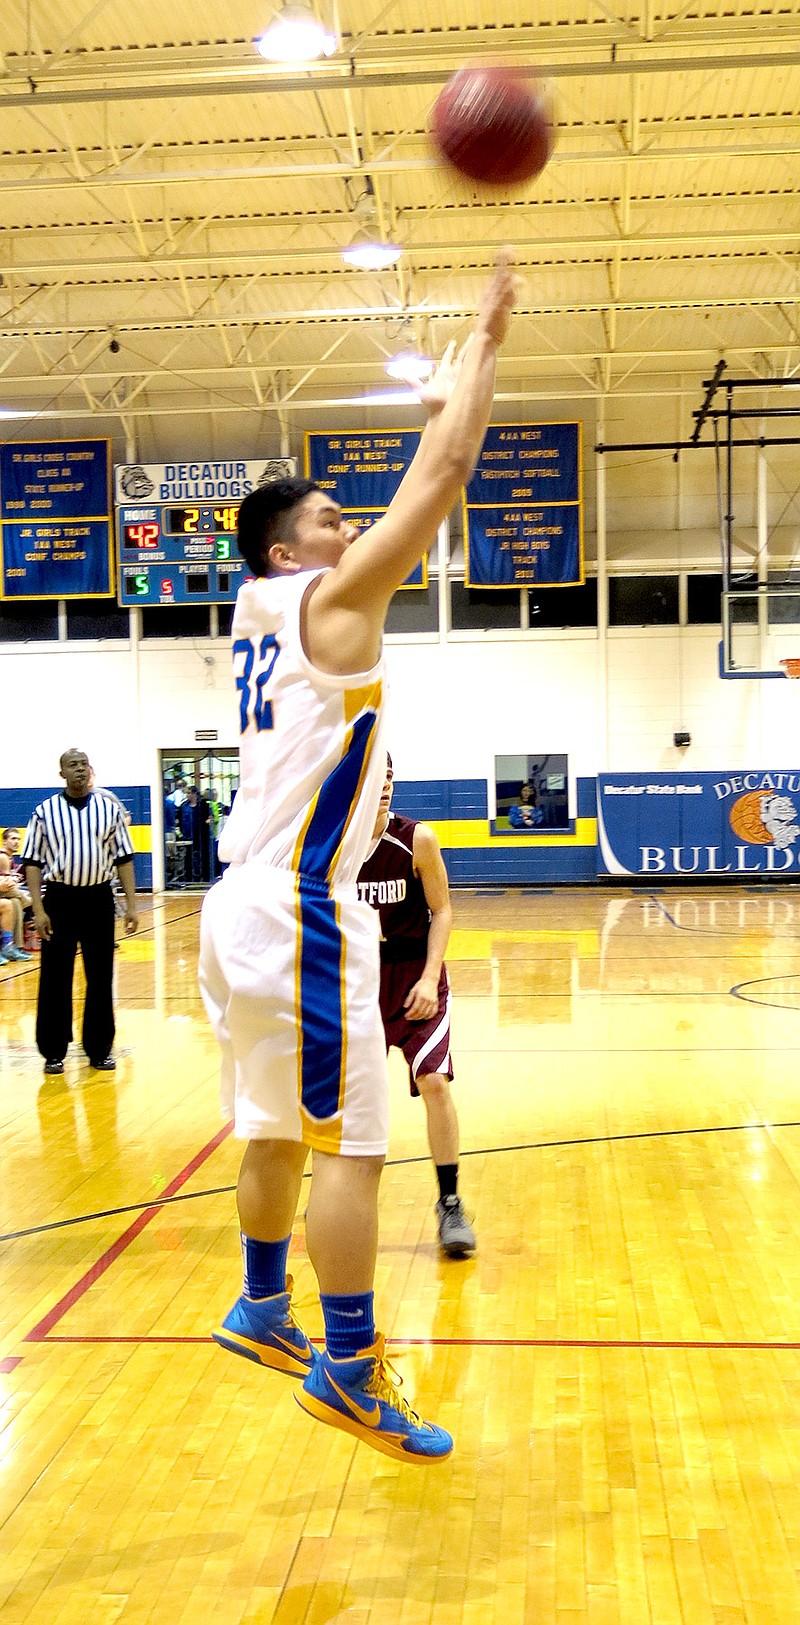 Photo by Mike Eckels Decatur&#8217;s Meng Vang attempts a jumper from the baseline during the Decatur-Hartford matchup Jan. 30 in the Dawg Pound at Decatur High. This was one of two shots Vang made in the second half, adding to the Bulldogs&#8217; 57 to 23 victory over the Hustlers.